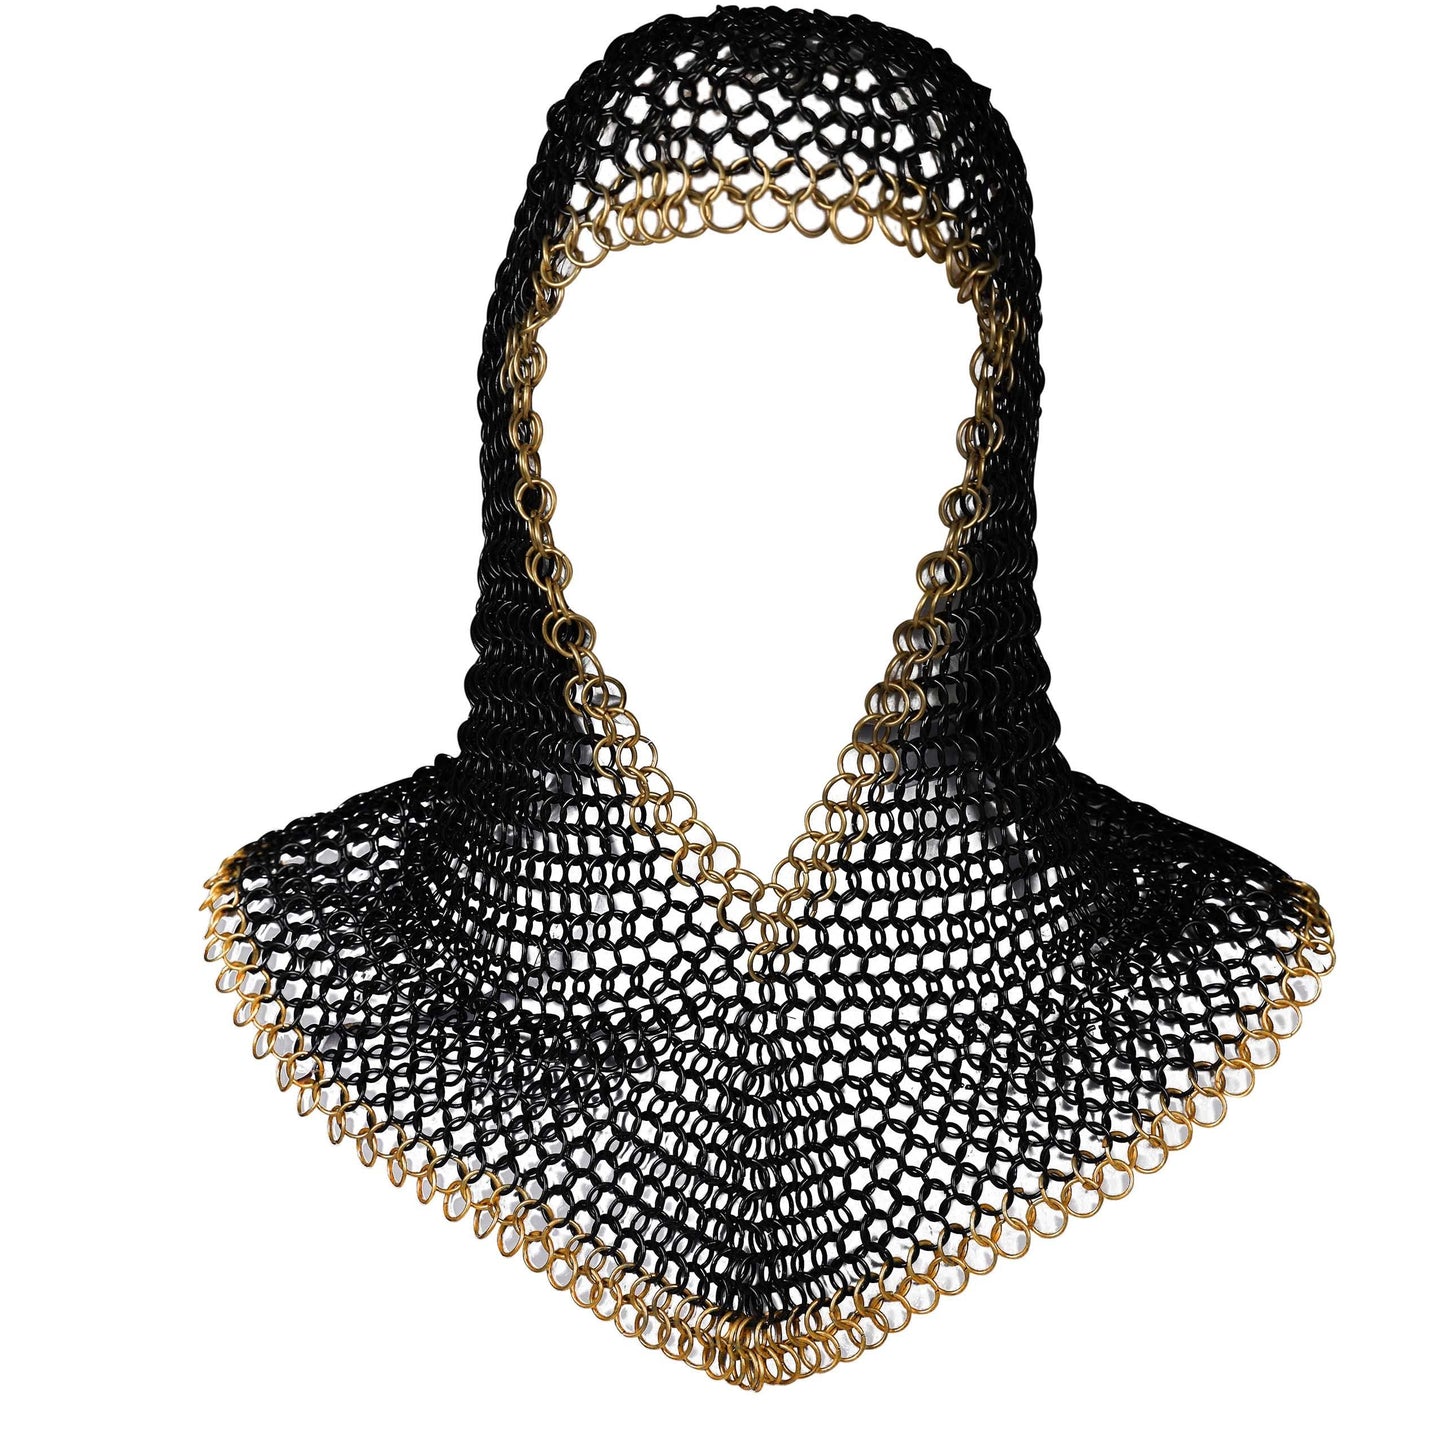 Silver-Wash Chain Mail Coif 16 Gauge